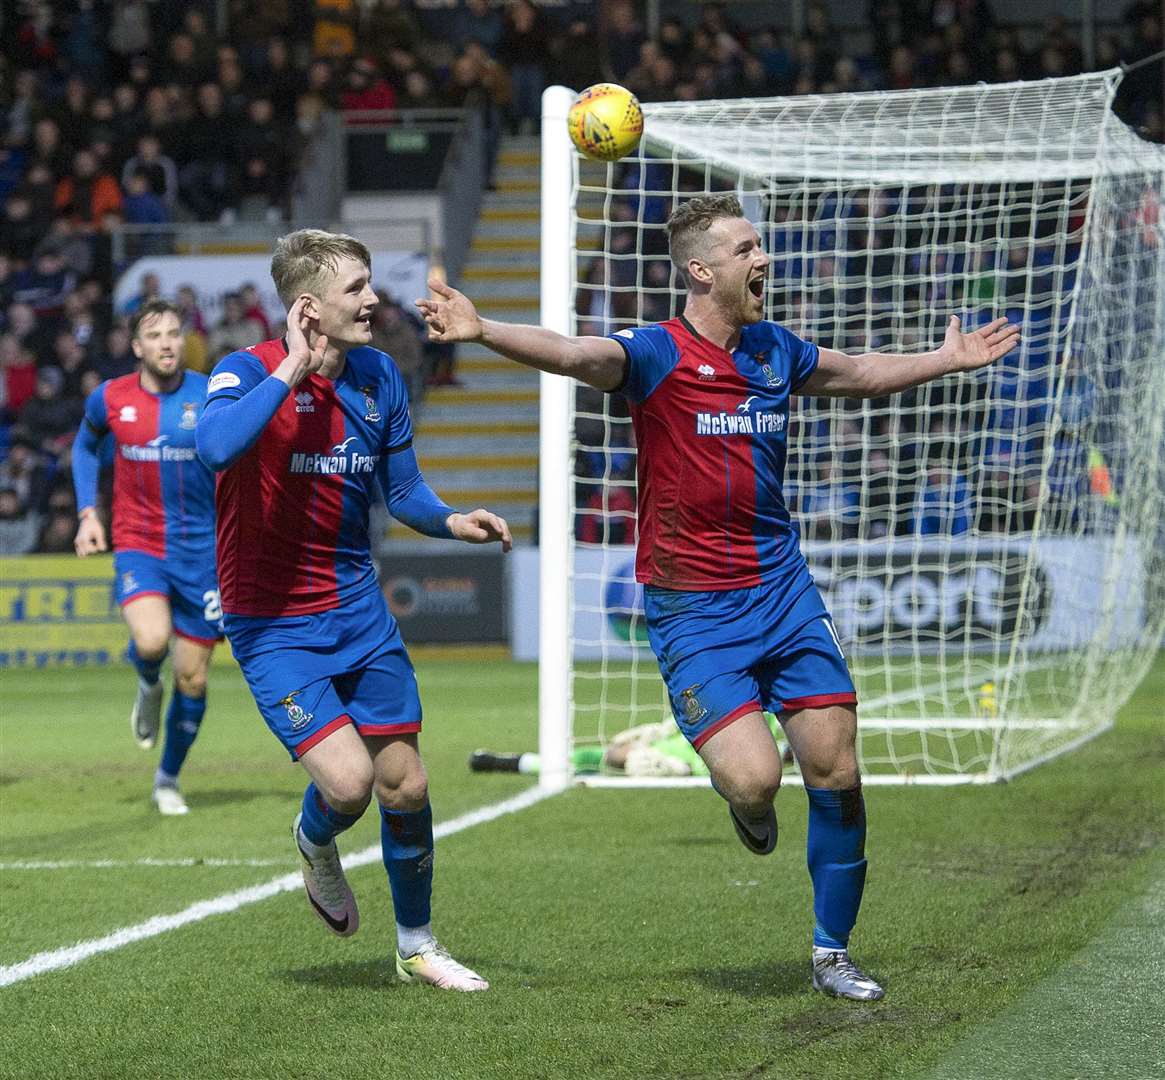 Jordan White is full of belief that ICT can overturn their 1-0 defeat from the first leg and progress past Dundee United in the play-offs. Pictures: Ken Macpherson